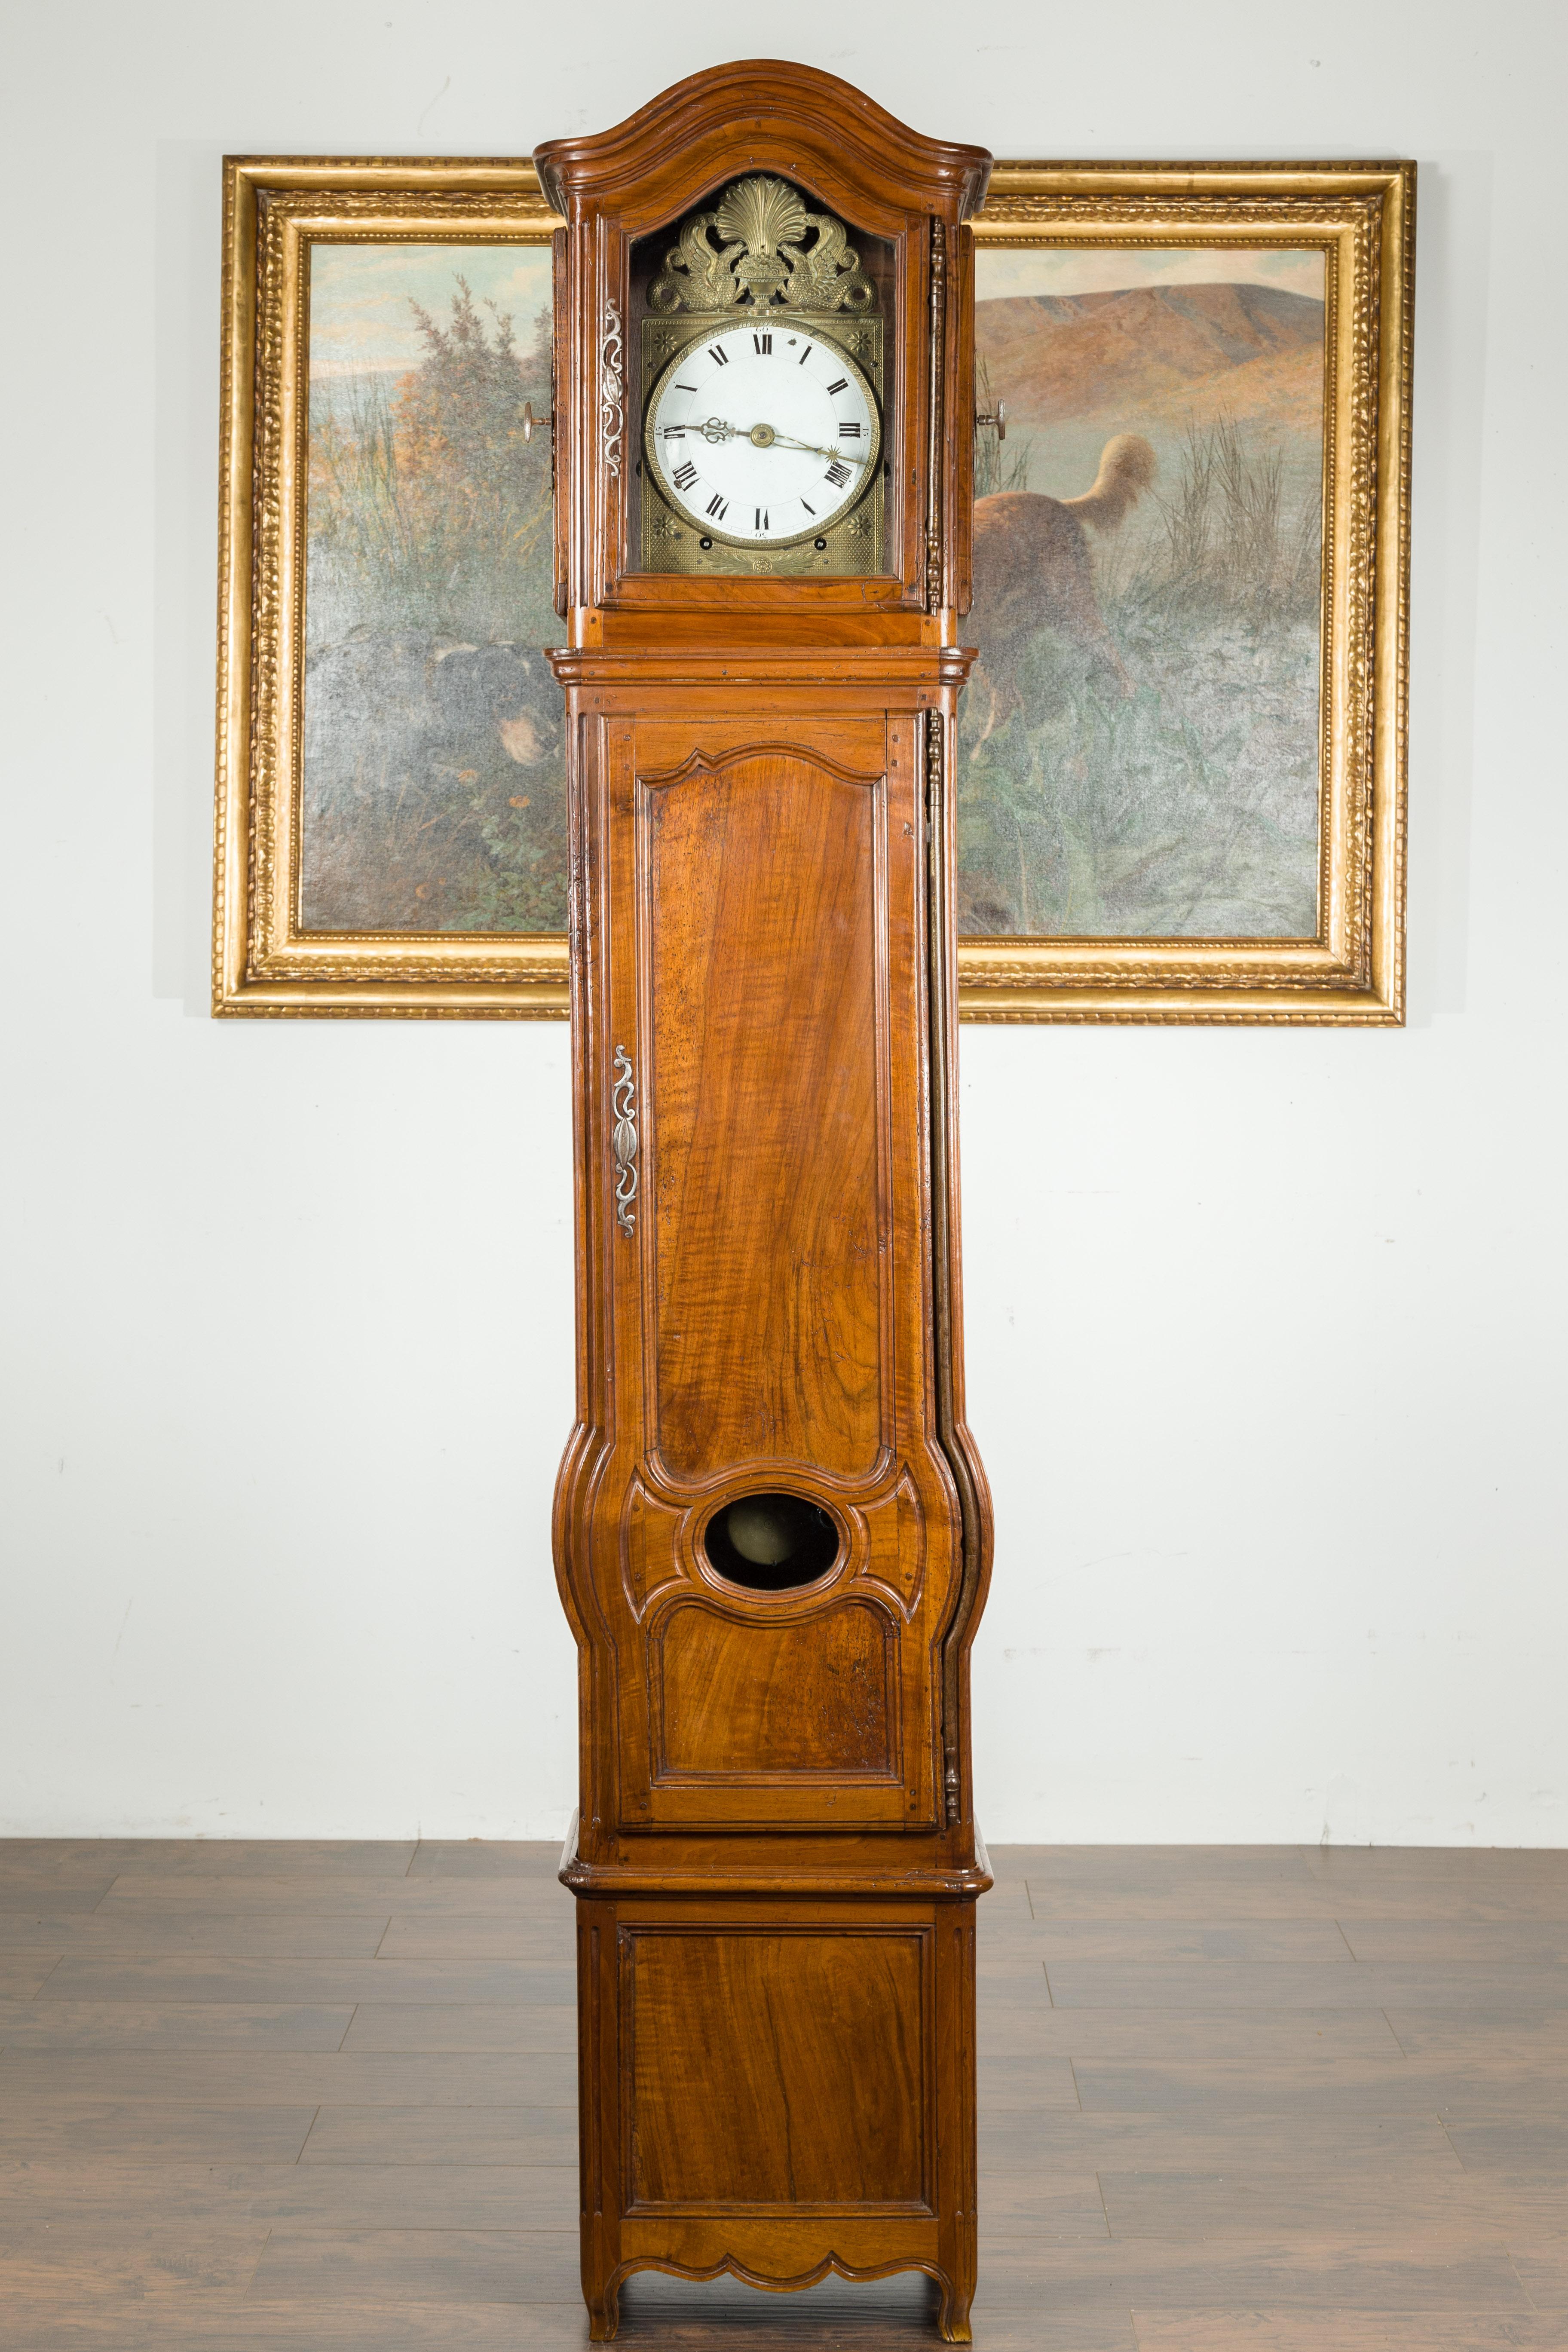 A country French walnut grandfather clock from the 19th century, with brass Empire style griffin figures and 'chapeau de gendarme' top. Created in France during the 19th century, this grandfather clock attracts our attention with its bonnet top and